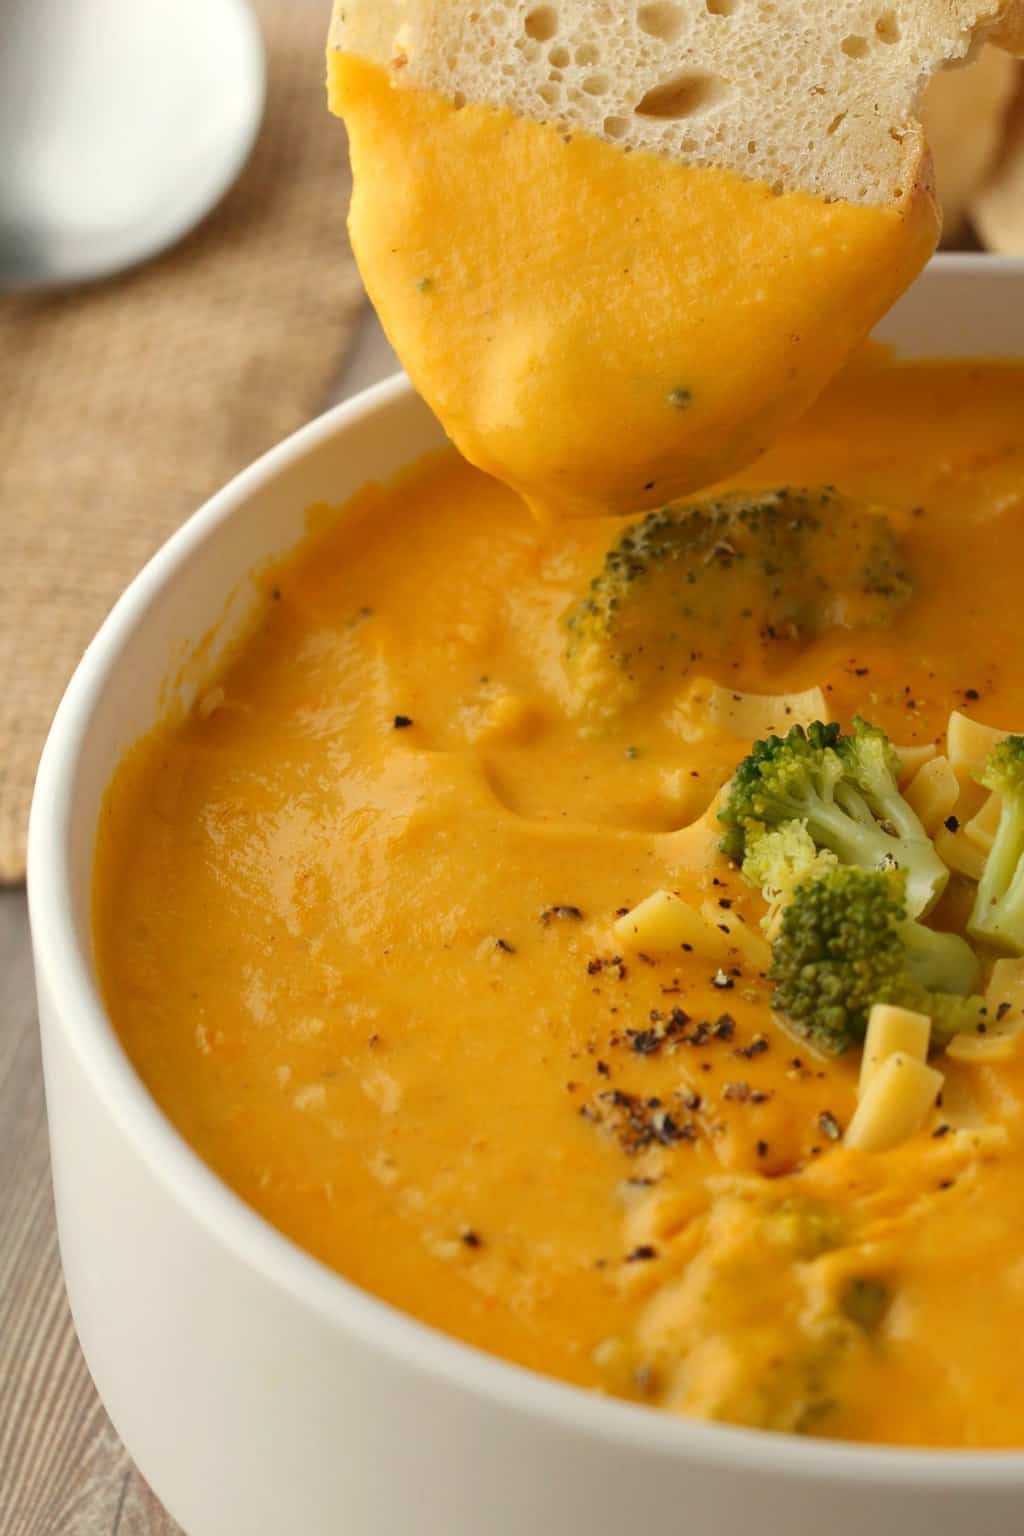 Slice of bread dipping into a bowl of vegan broccoli cheese soup.